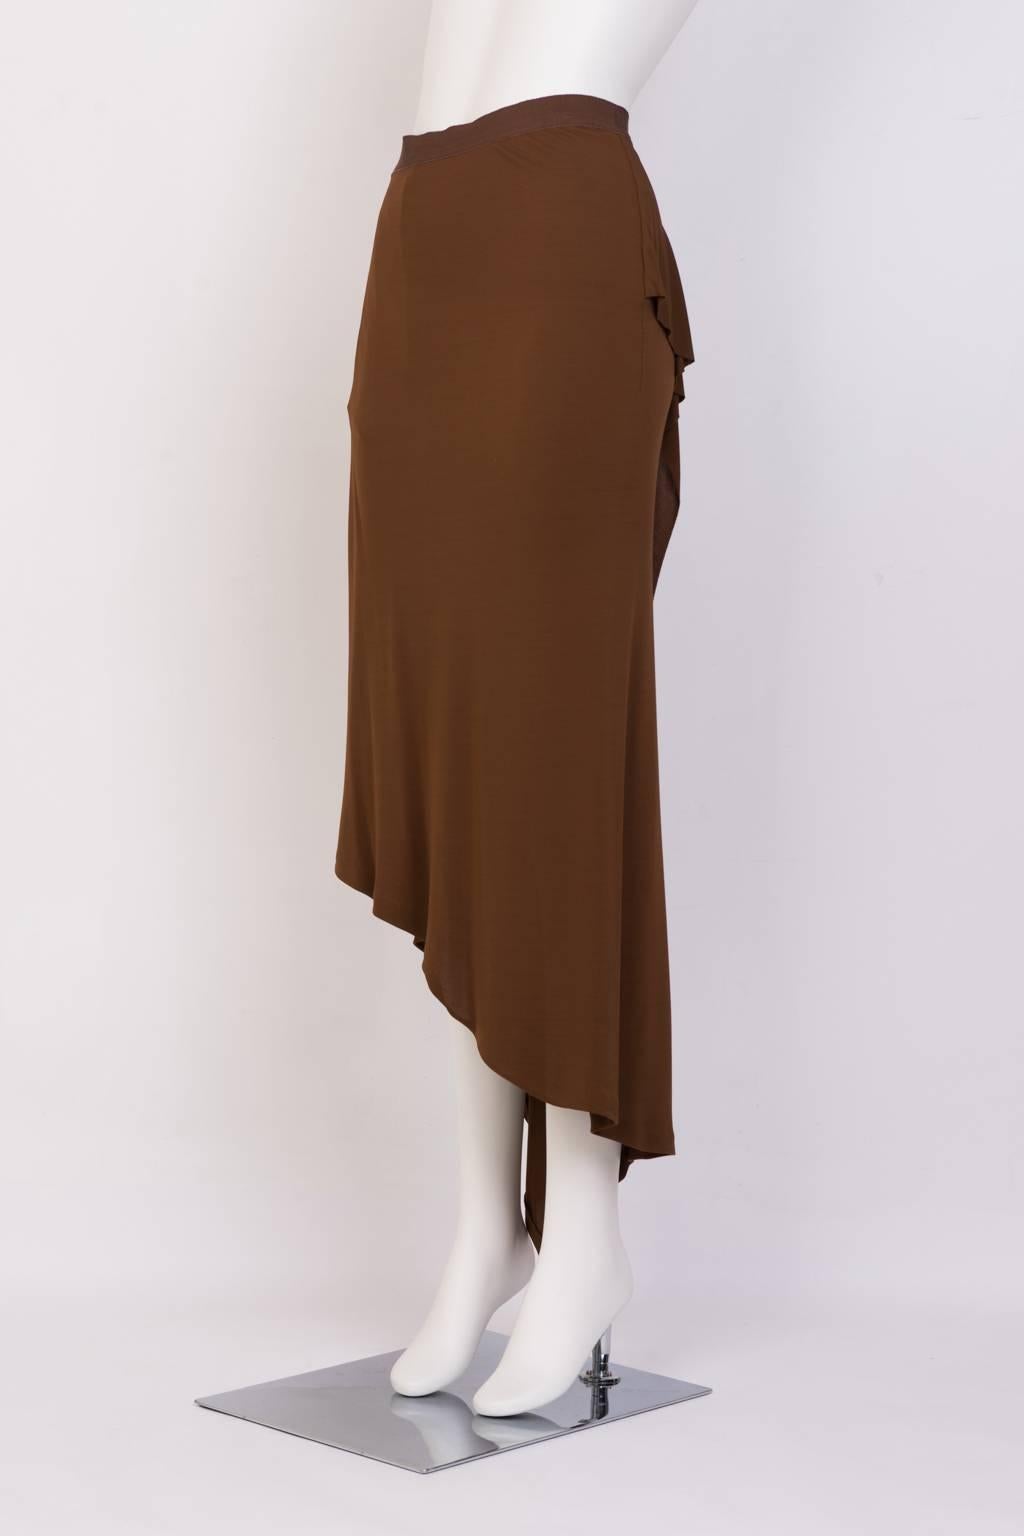 Wrapped & Draped, crepe skirt with asymmetrical cut and back slit.